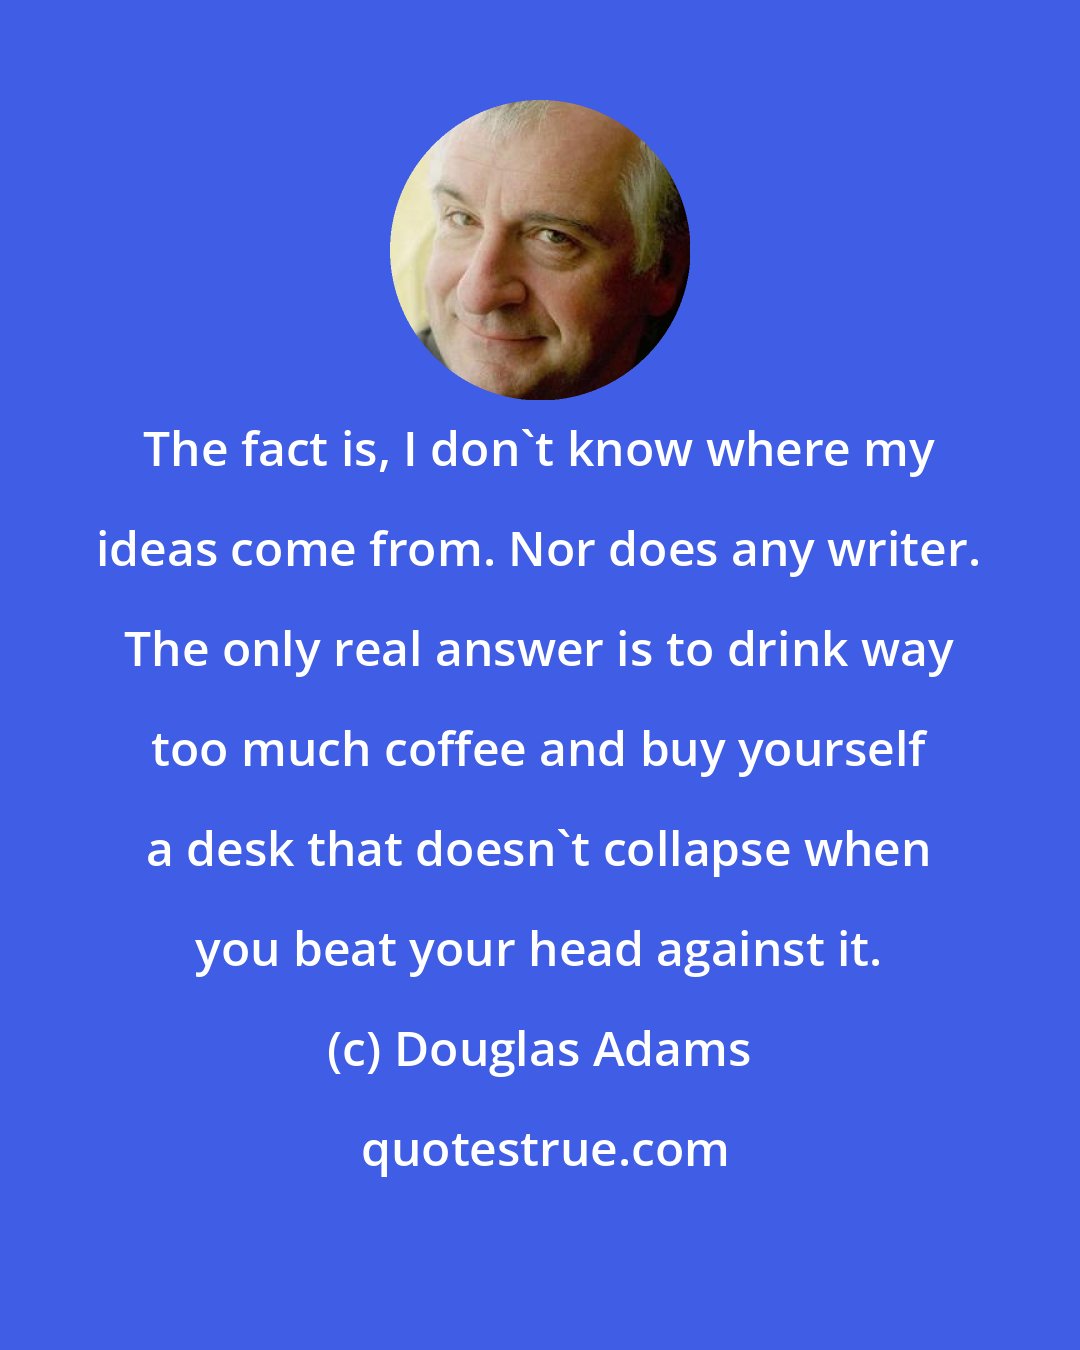 Douglas Adams: The fact is, I don't know where my ideas come from. Nor does any writer. The only real answer is to drink way too much coffee and buy yourself a desk that doesn't collapse when you beat your head against it.